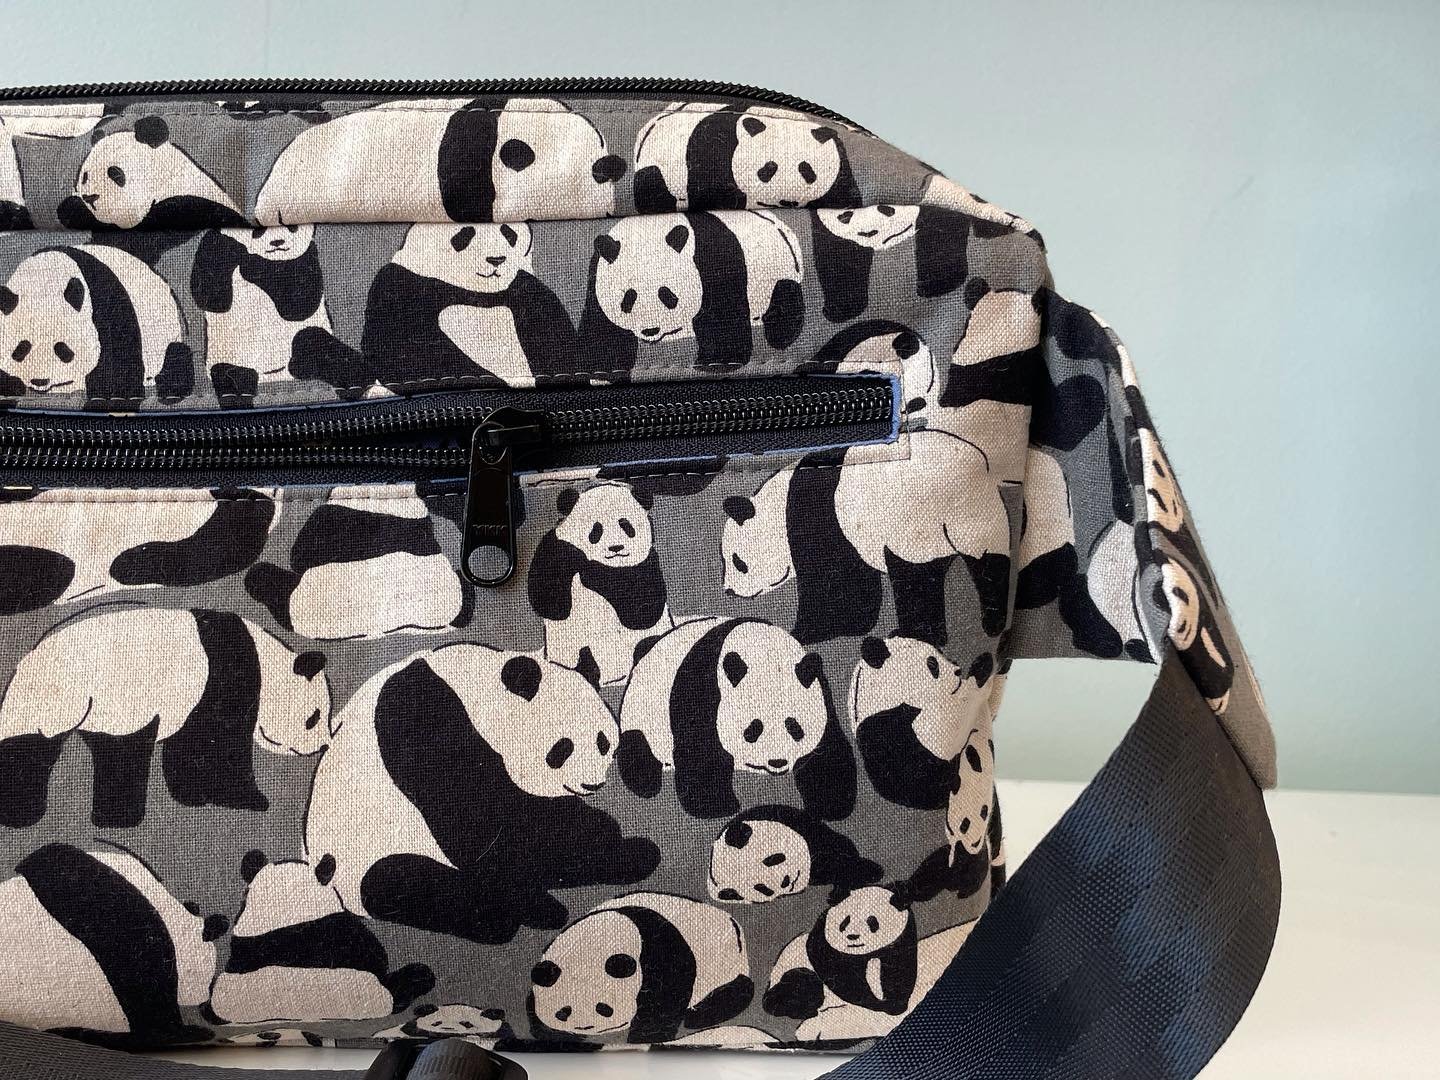 🐼🪡The @robertkaufman panda fabric is so popular here at Sew on Central! This is a modified Sandhill Sling made by one of our lovely students! She took @noodlehead531 design and moved around the zipper placements!

✂️🧵We have the pattern for this b